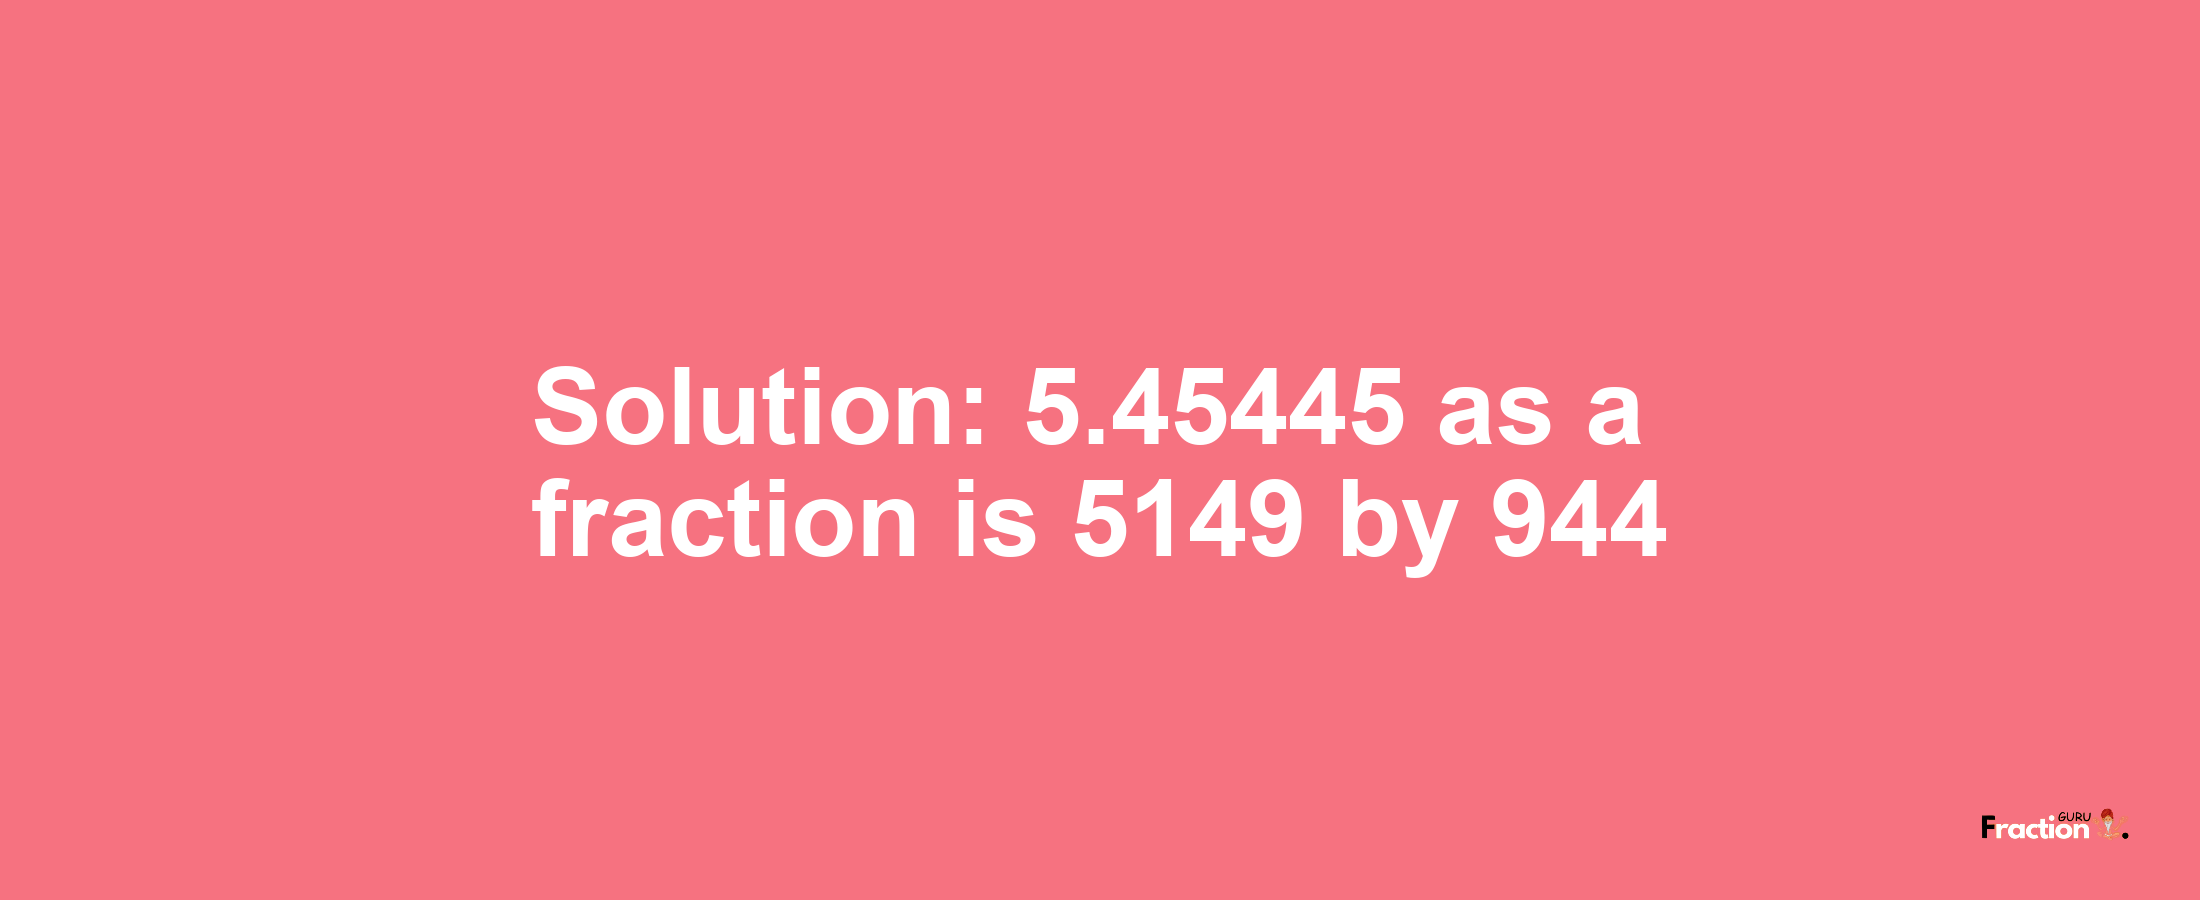 Solution:5.45445 as a fraction is 5149/944